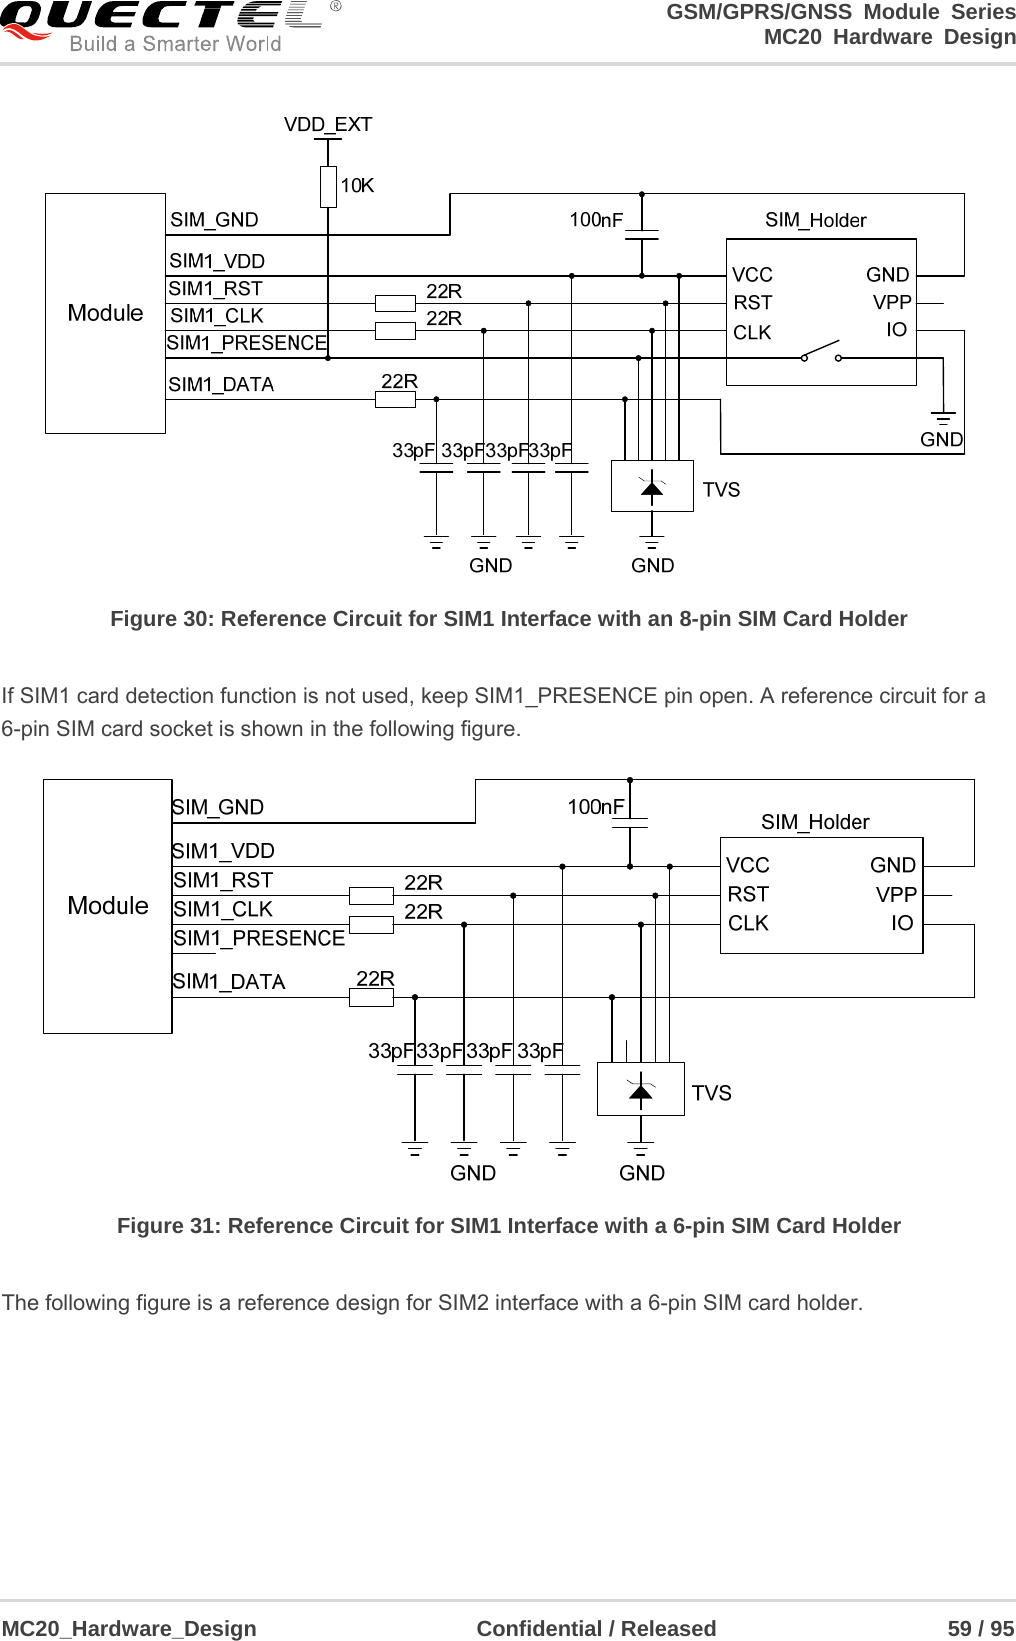                                                                     GSM/GPRS/GNSS Module Series                                                                 MC20 Hardware Design  MC20_Hardware_Design                    Confidential / Released                     59 / 95      Figure 30: Reference Circuit for SIM1 Interface with an 8-pin SIM Card Holder  If SIM1 card detection function is not used, keep SIM1_PRESENCE pin open. A reference circuit for a 6-pin SIM card socket is shown in the following figure.  Figure 31: Reference Circuit for SIM1 Interface with a 6-pin SIM Card Holder  The following figure is a reference design for SIM2 interface with a 6-pin SIM card holder. 